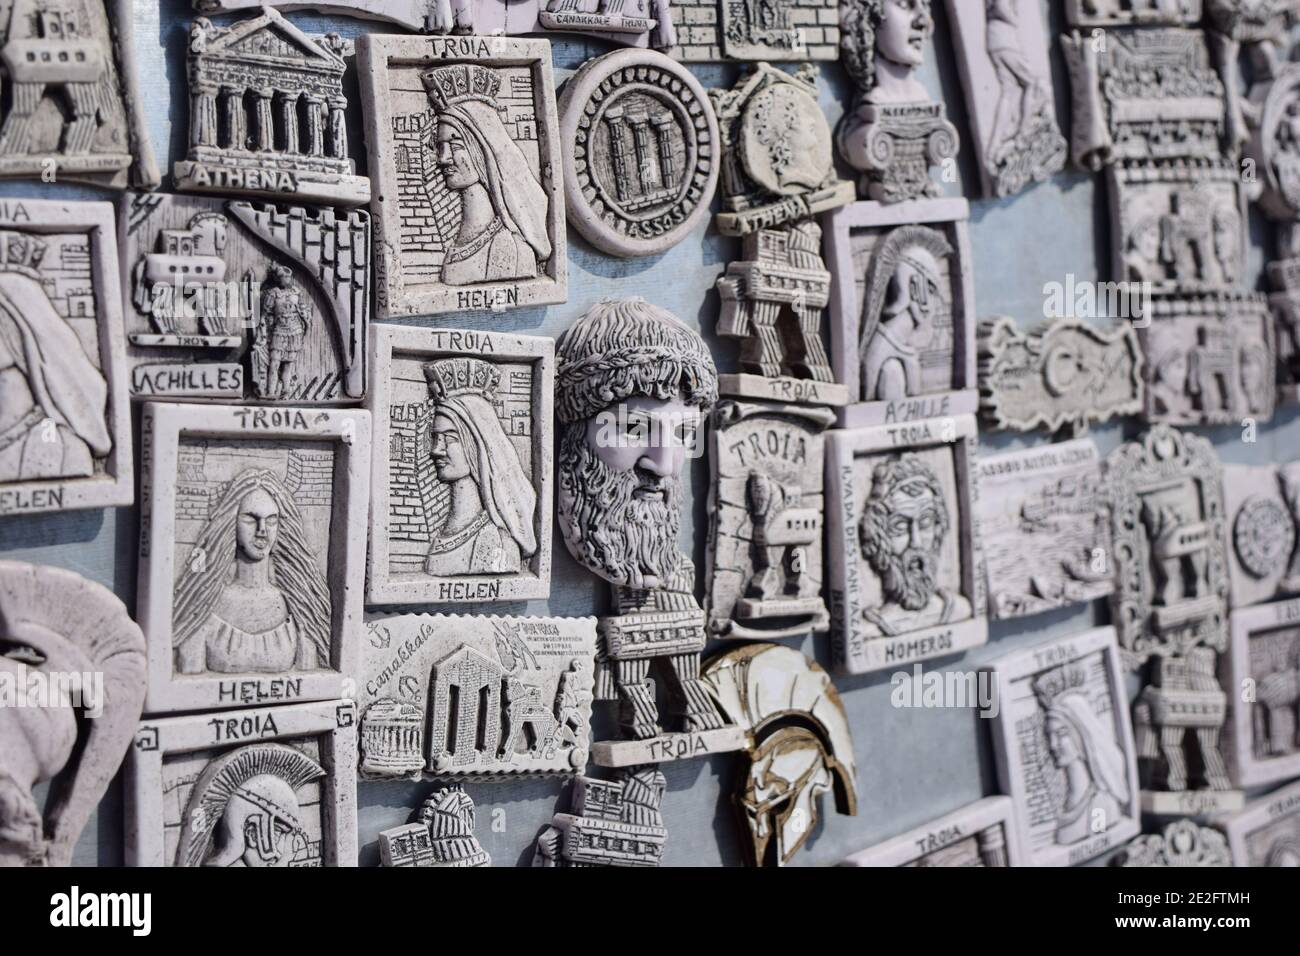 Selective shot of small sculpted images about Greece and Greek gods mounted on the wall Stock Photo